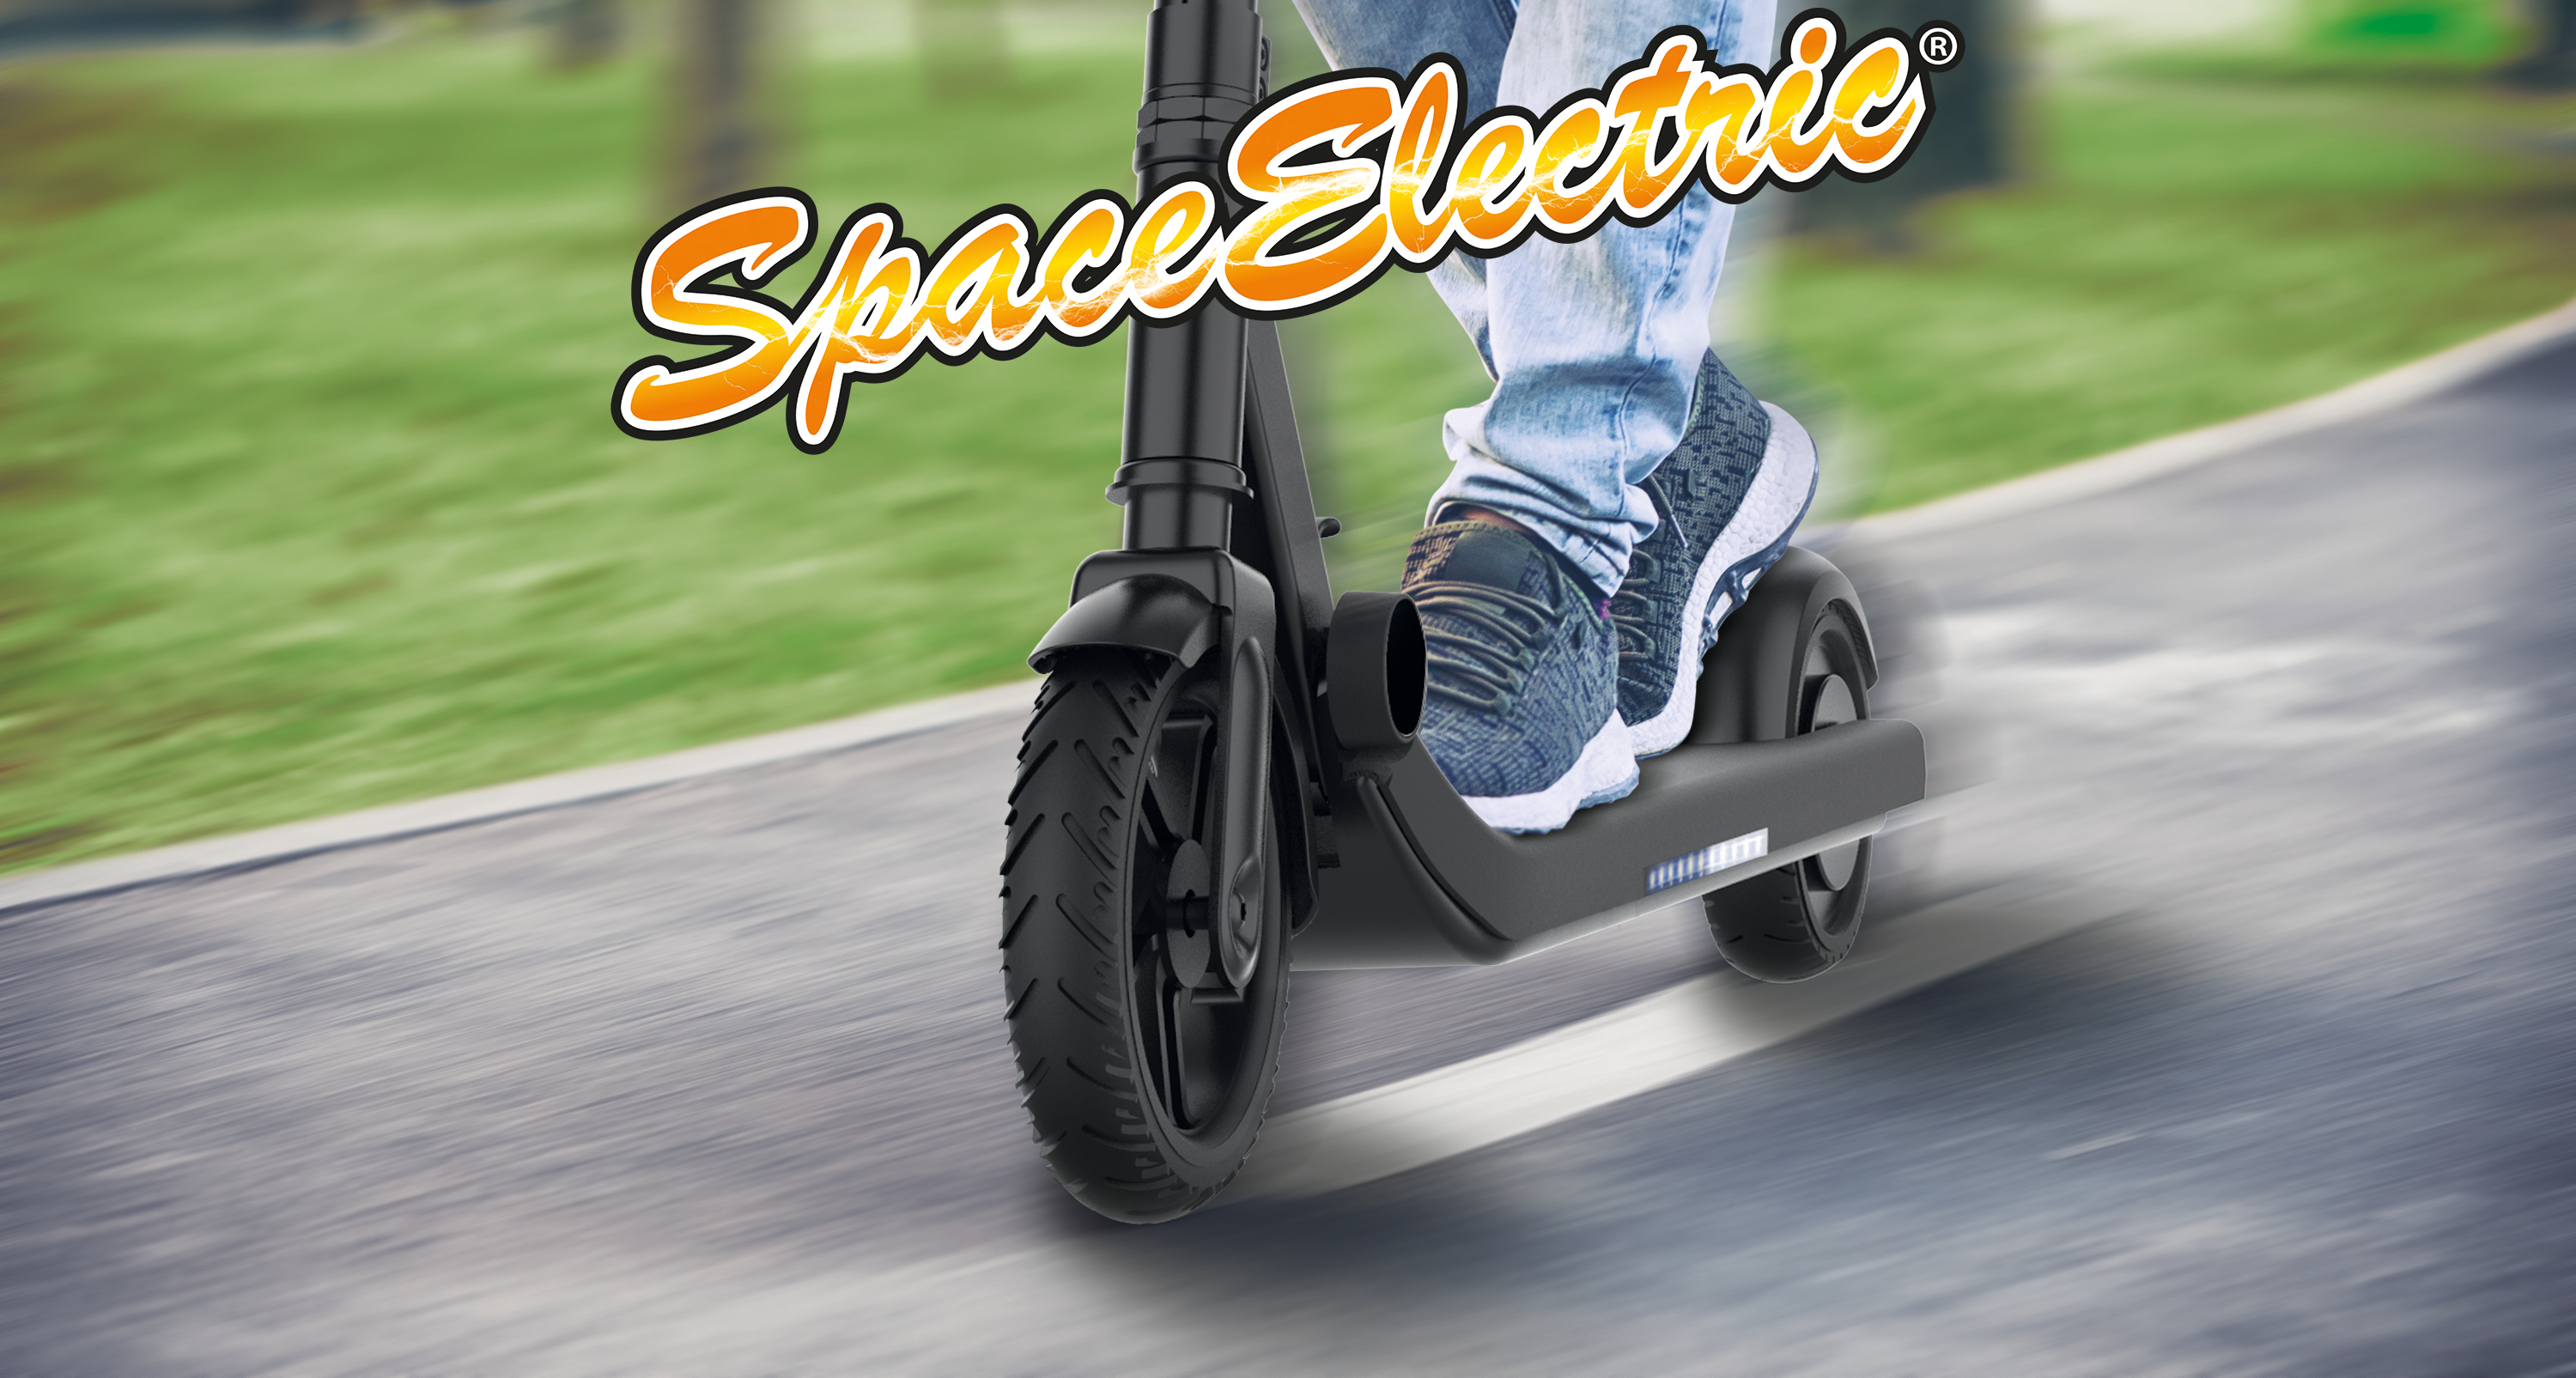 Space Electric E110 series